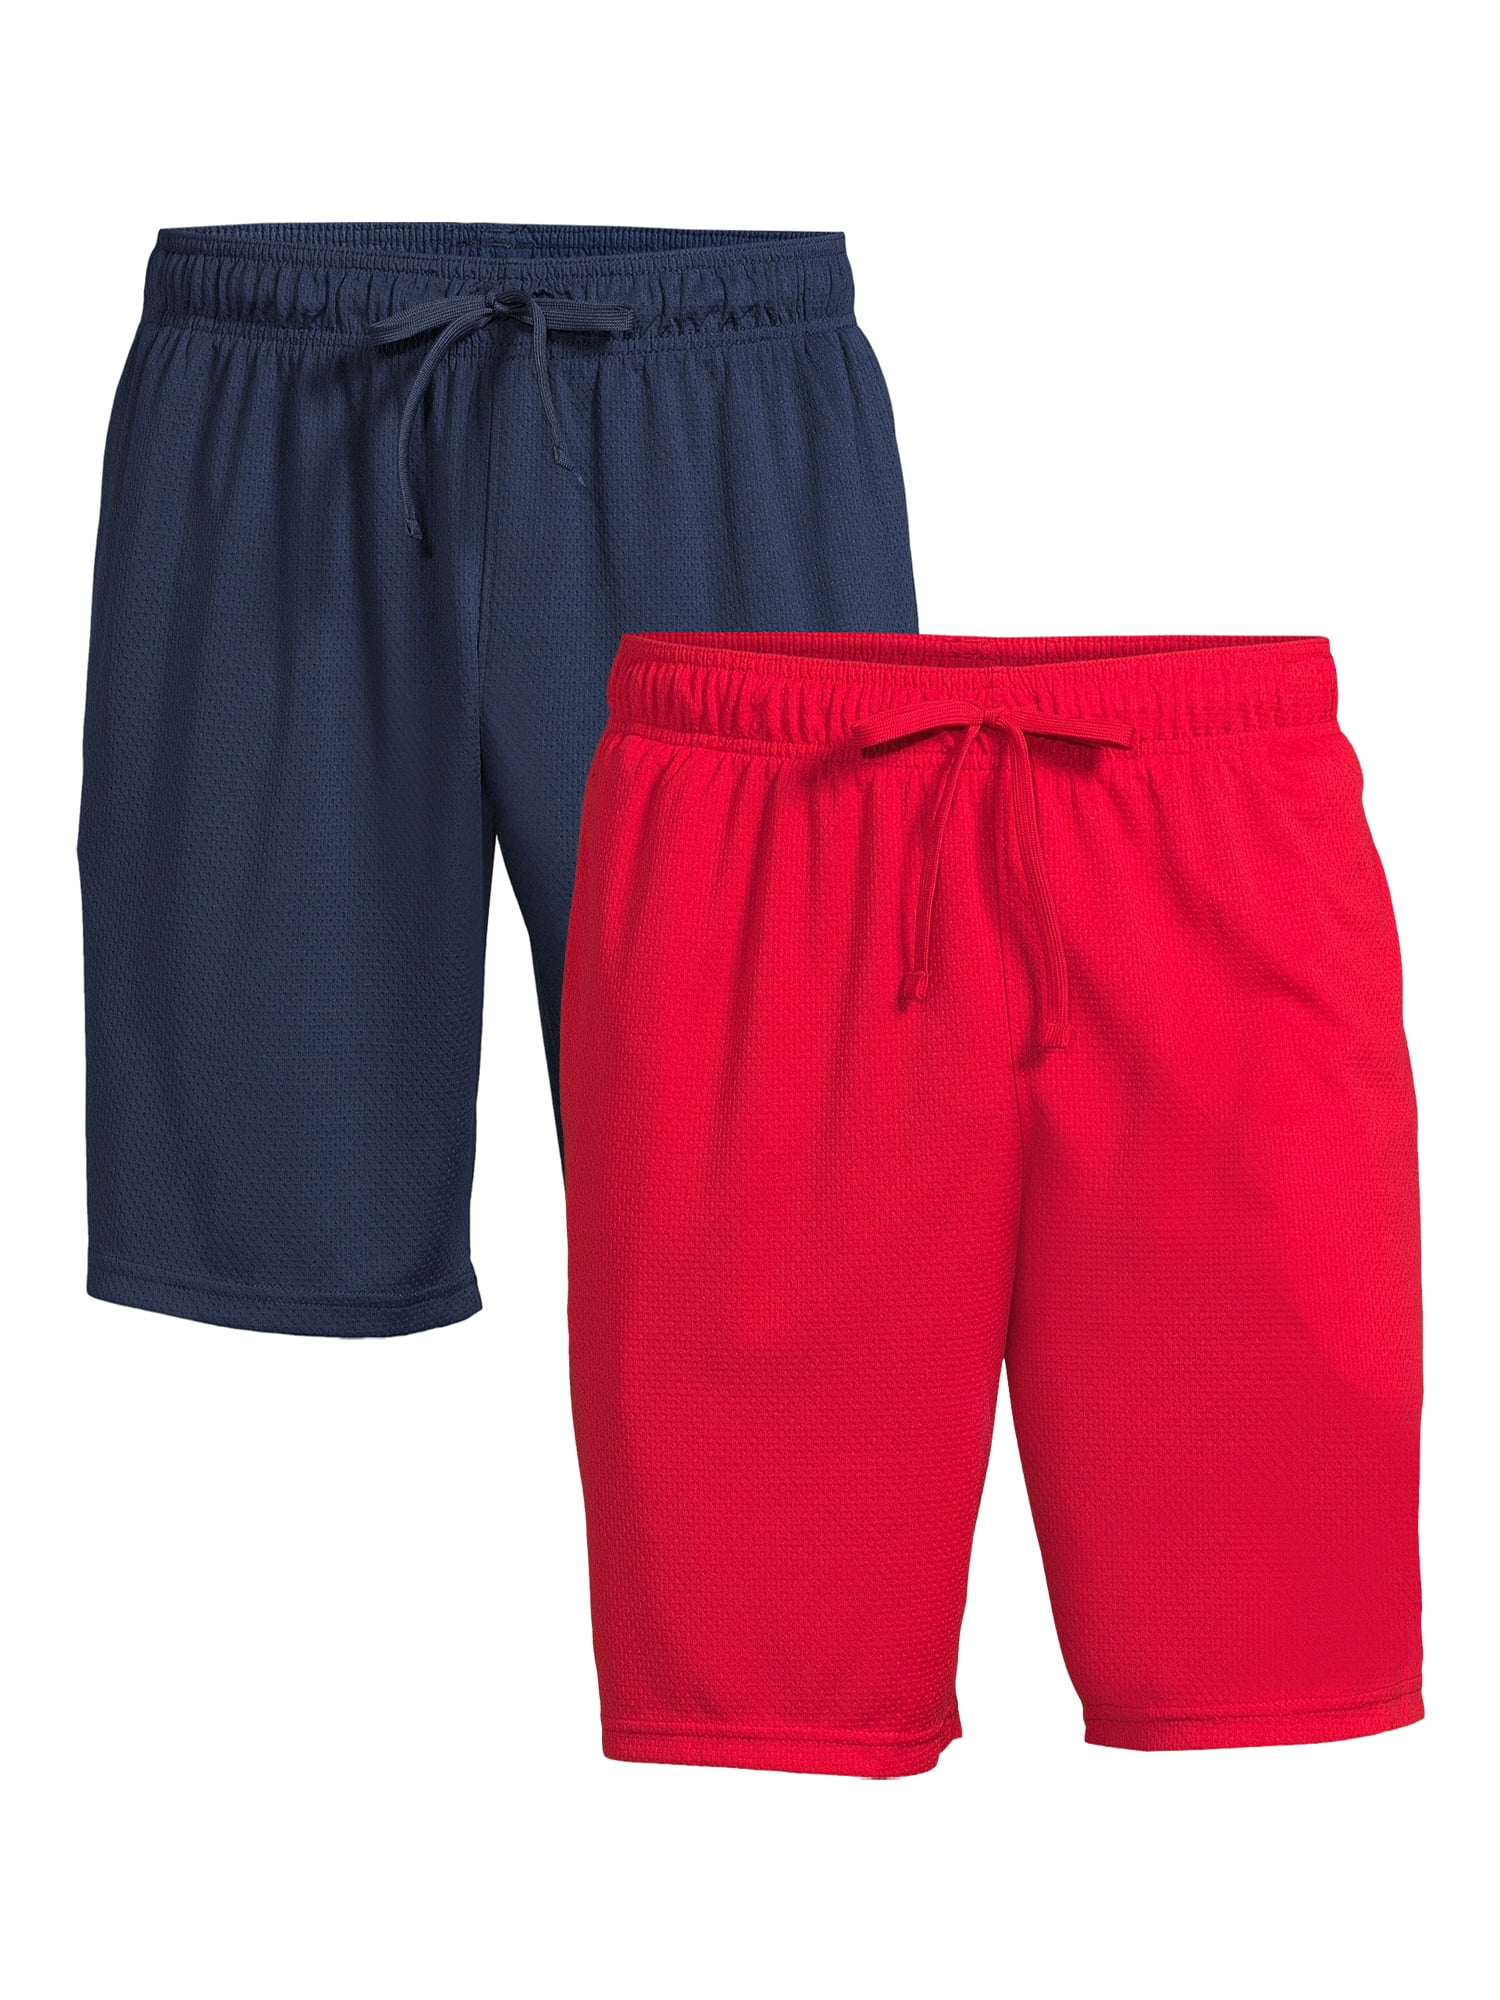 Athletic Works Men's and Big Men's Active Dazzle Shorts, 2-Pack, Up to ...